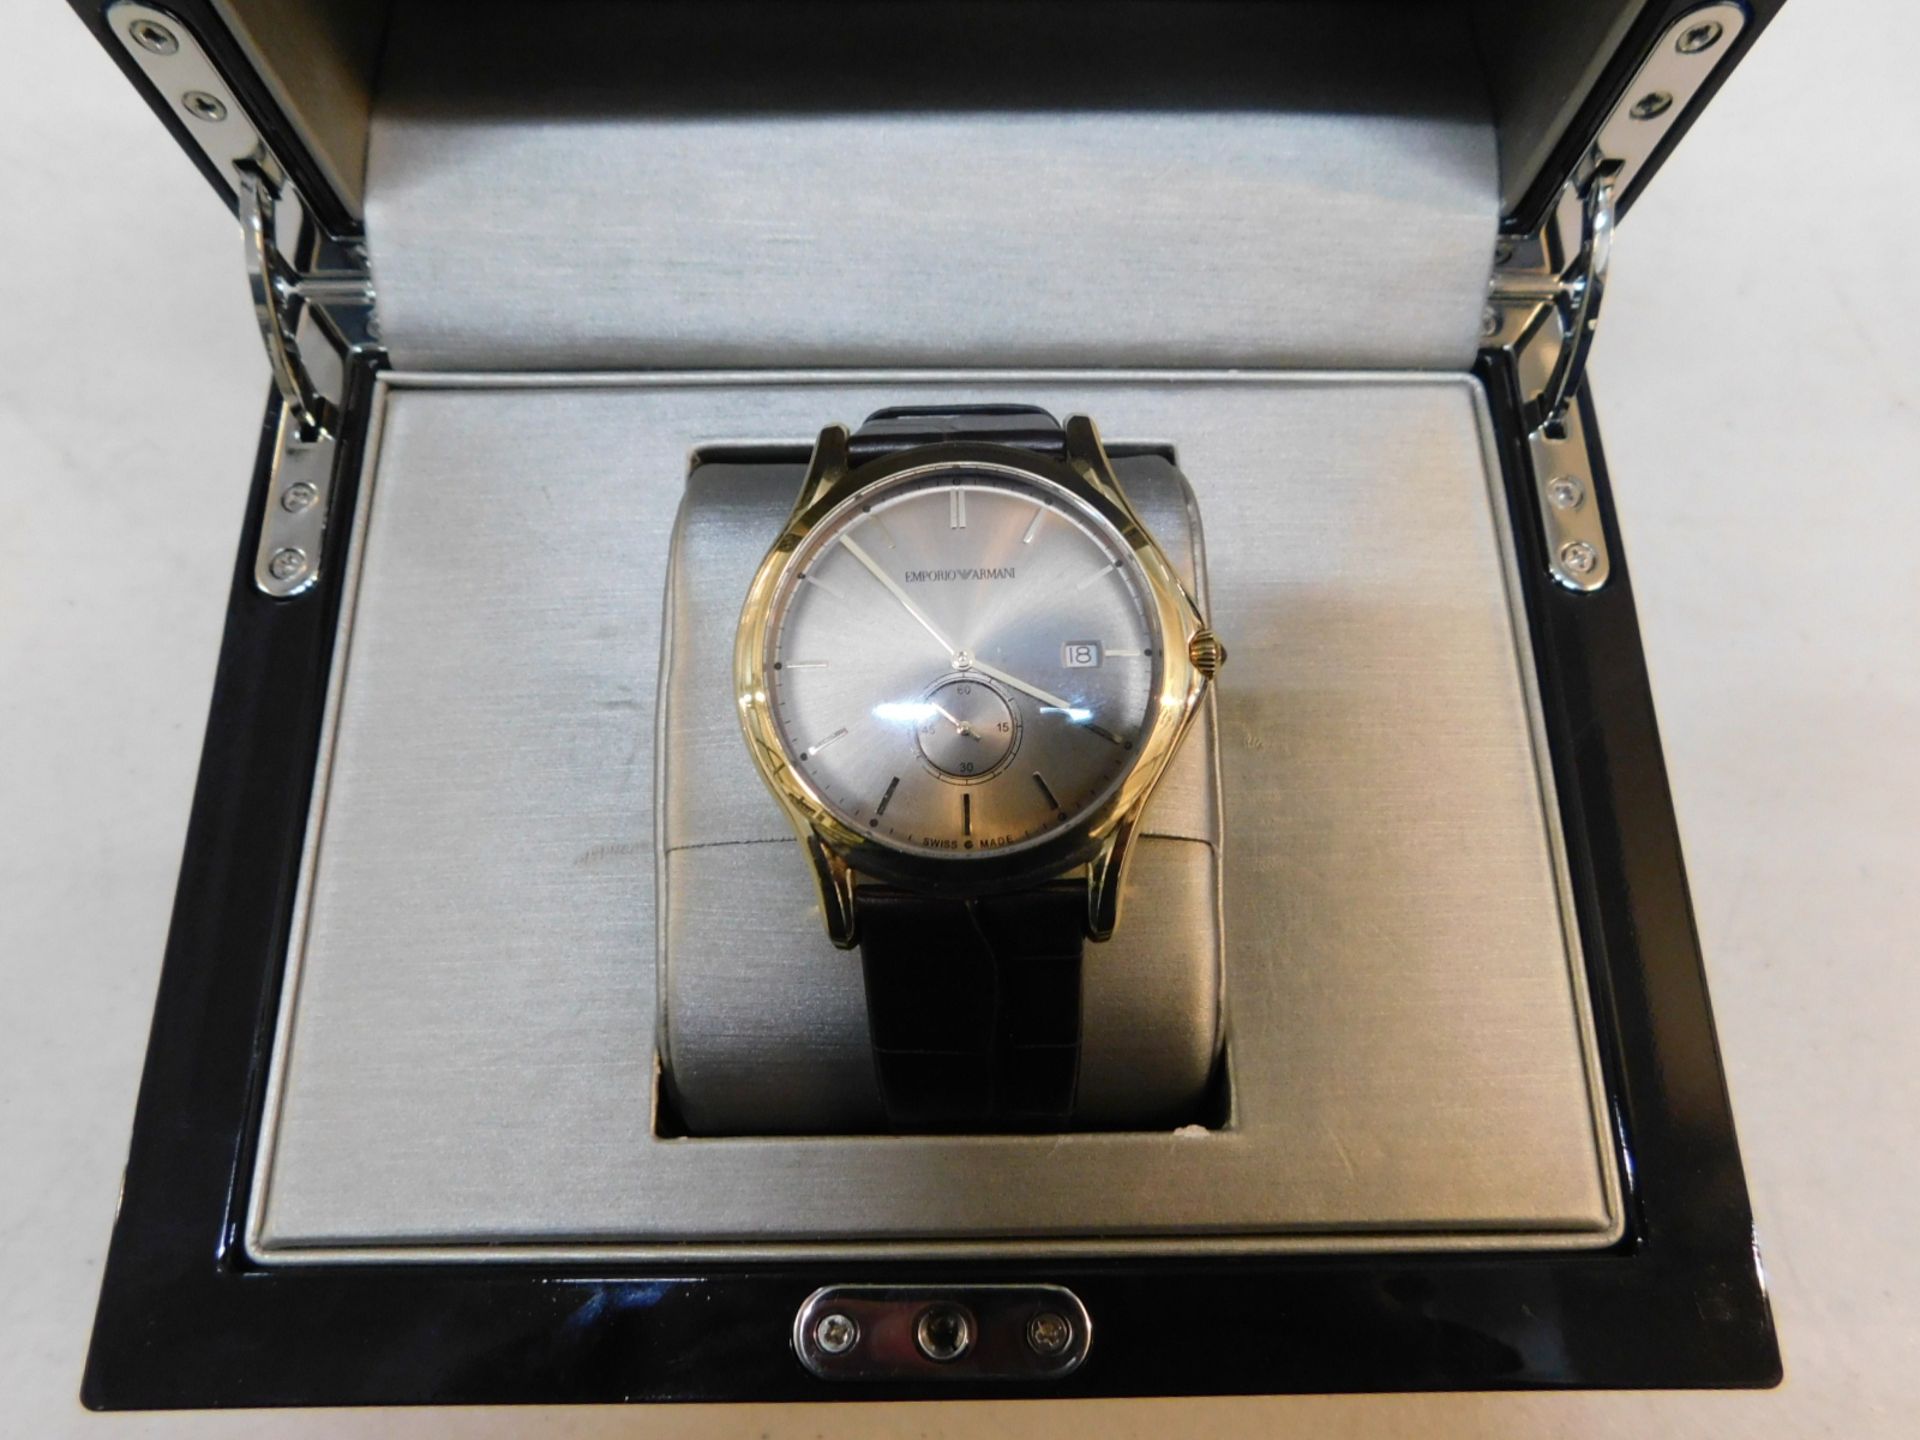 1 BOXED EMPORIO ARMANI SWISS MADE GOLD GENTS WATCH MODEL ARS1004 RRP Â£600